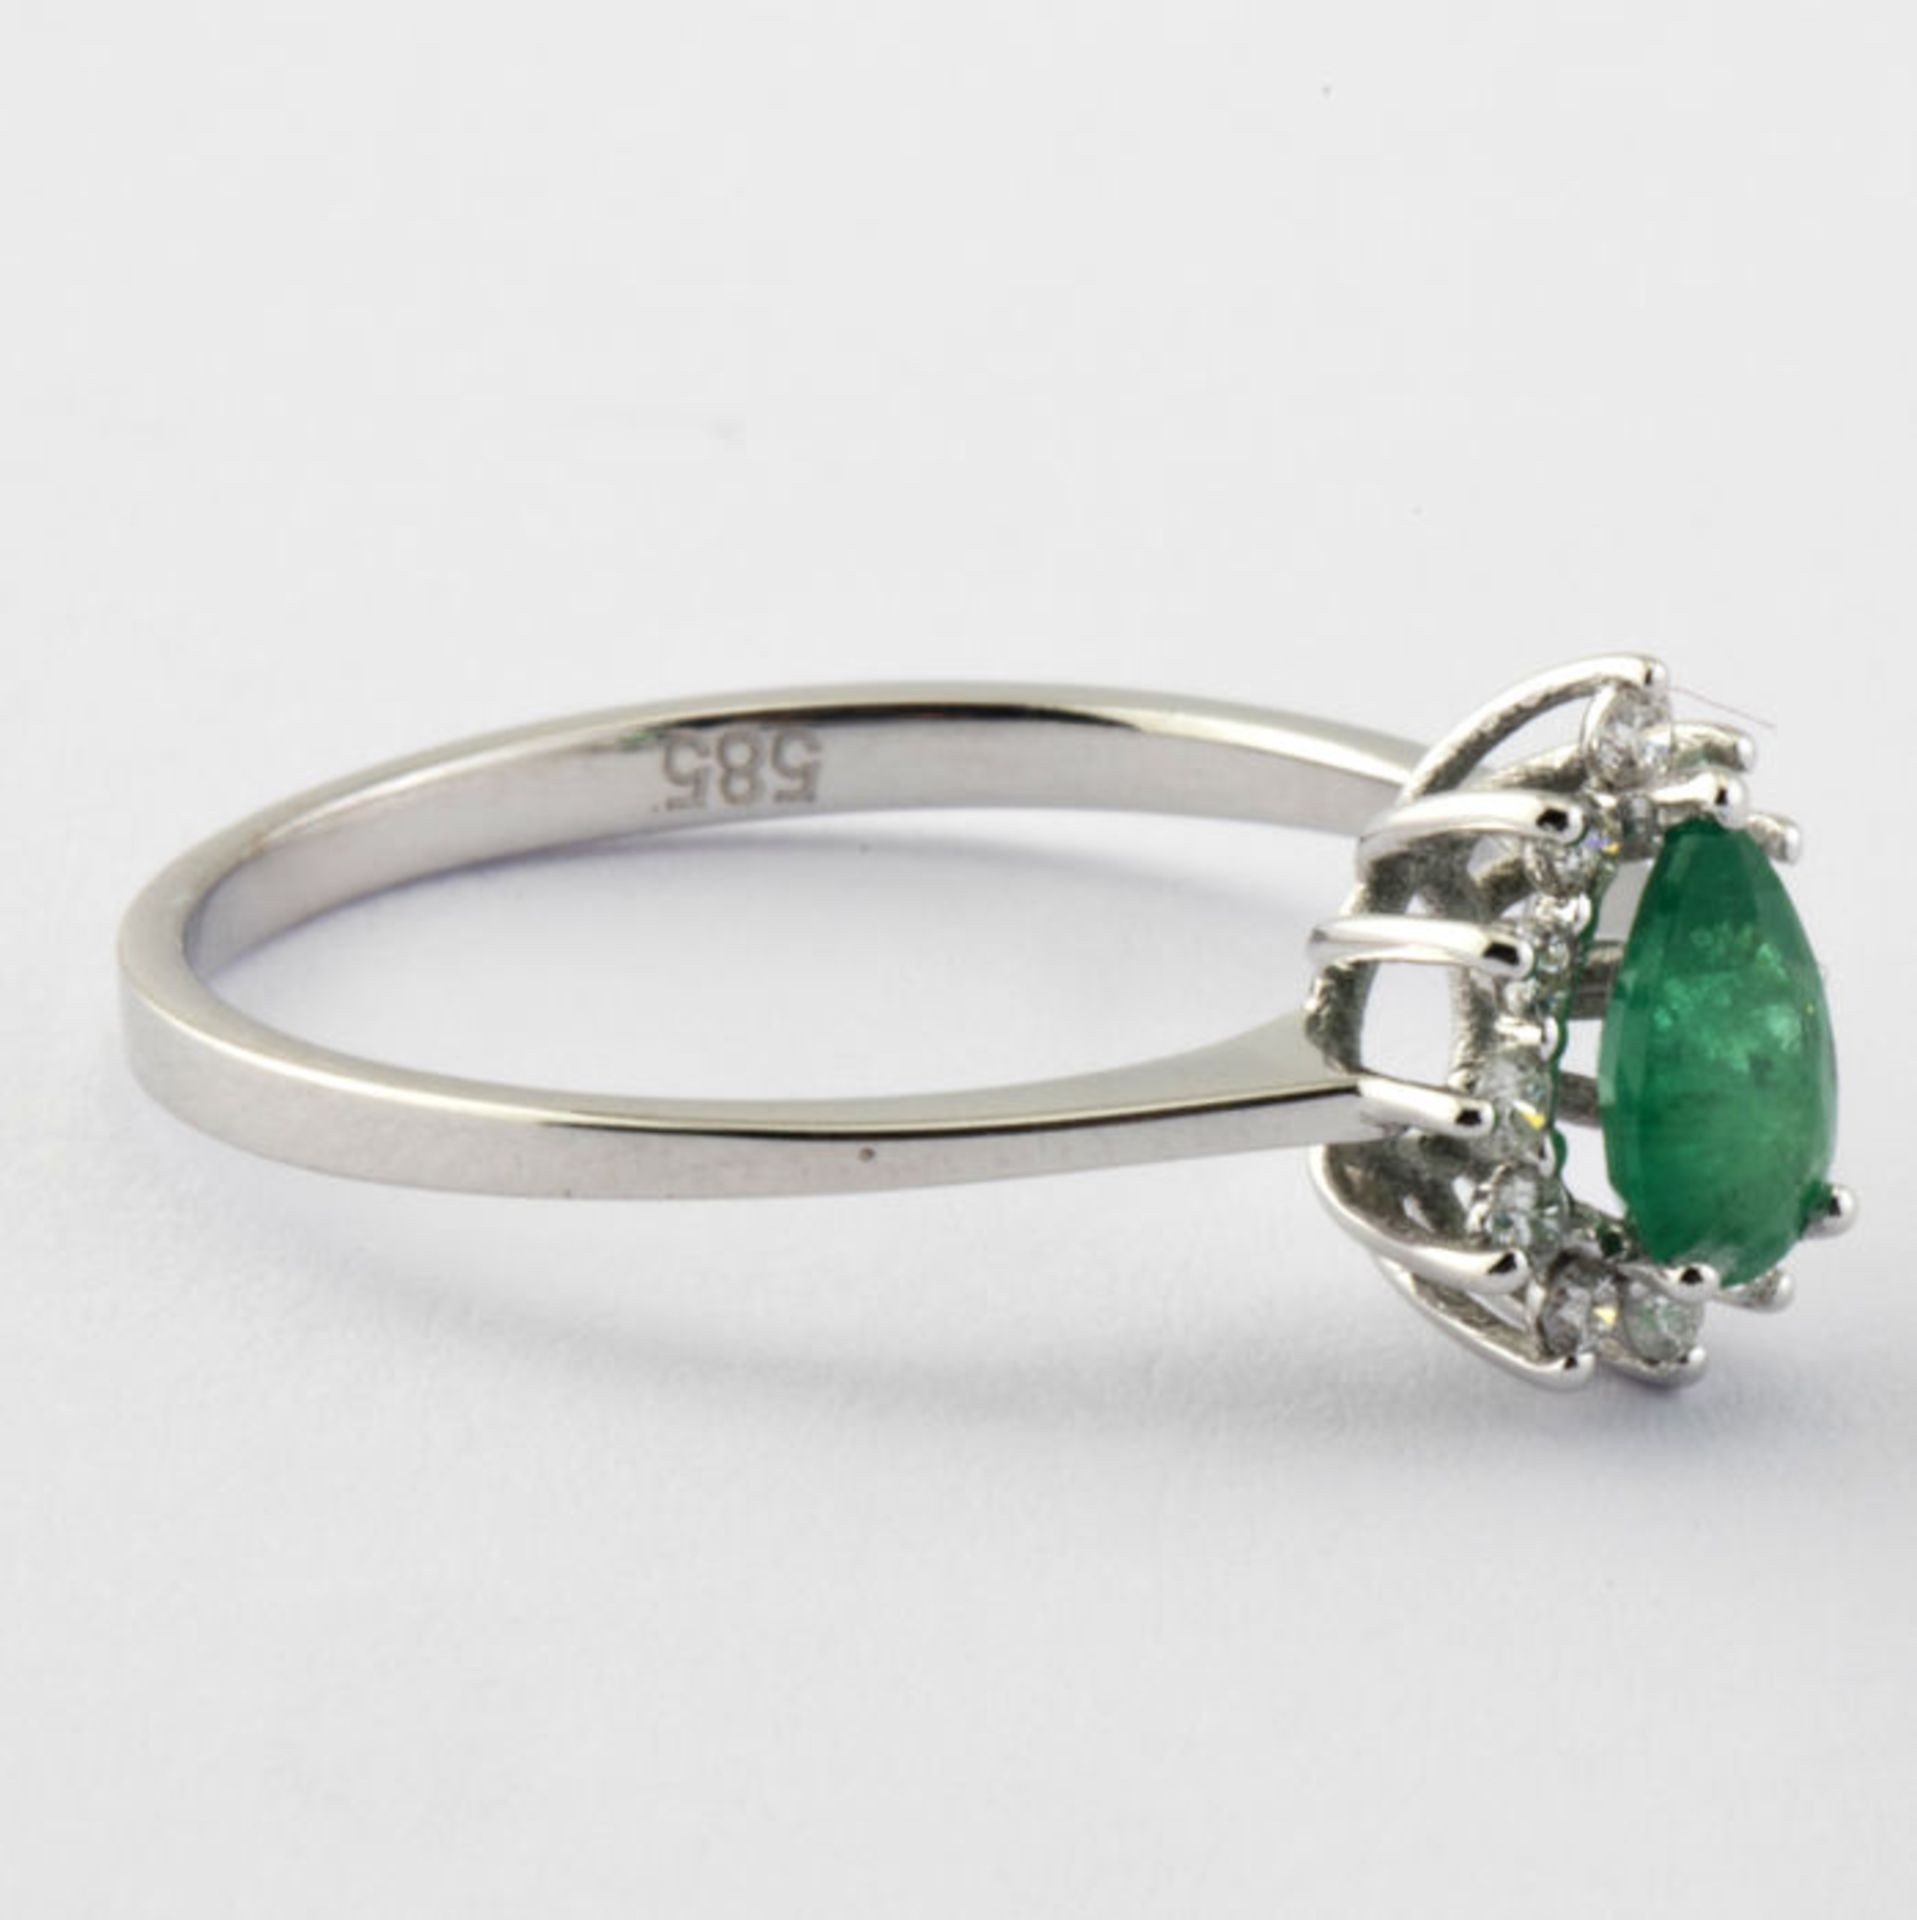 14K White Gold Cluster Ring set with natural Emerald and 12 Brilliant cut diamonds, 0,50ct in total - Image 2 of 5